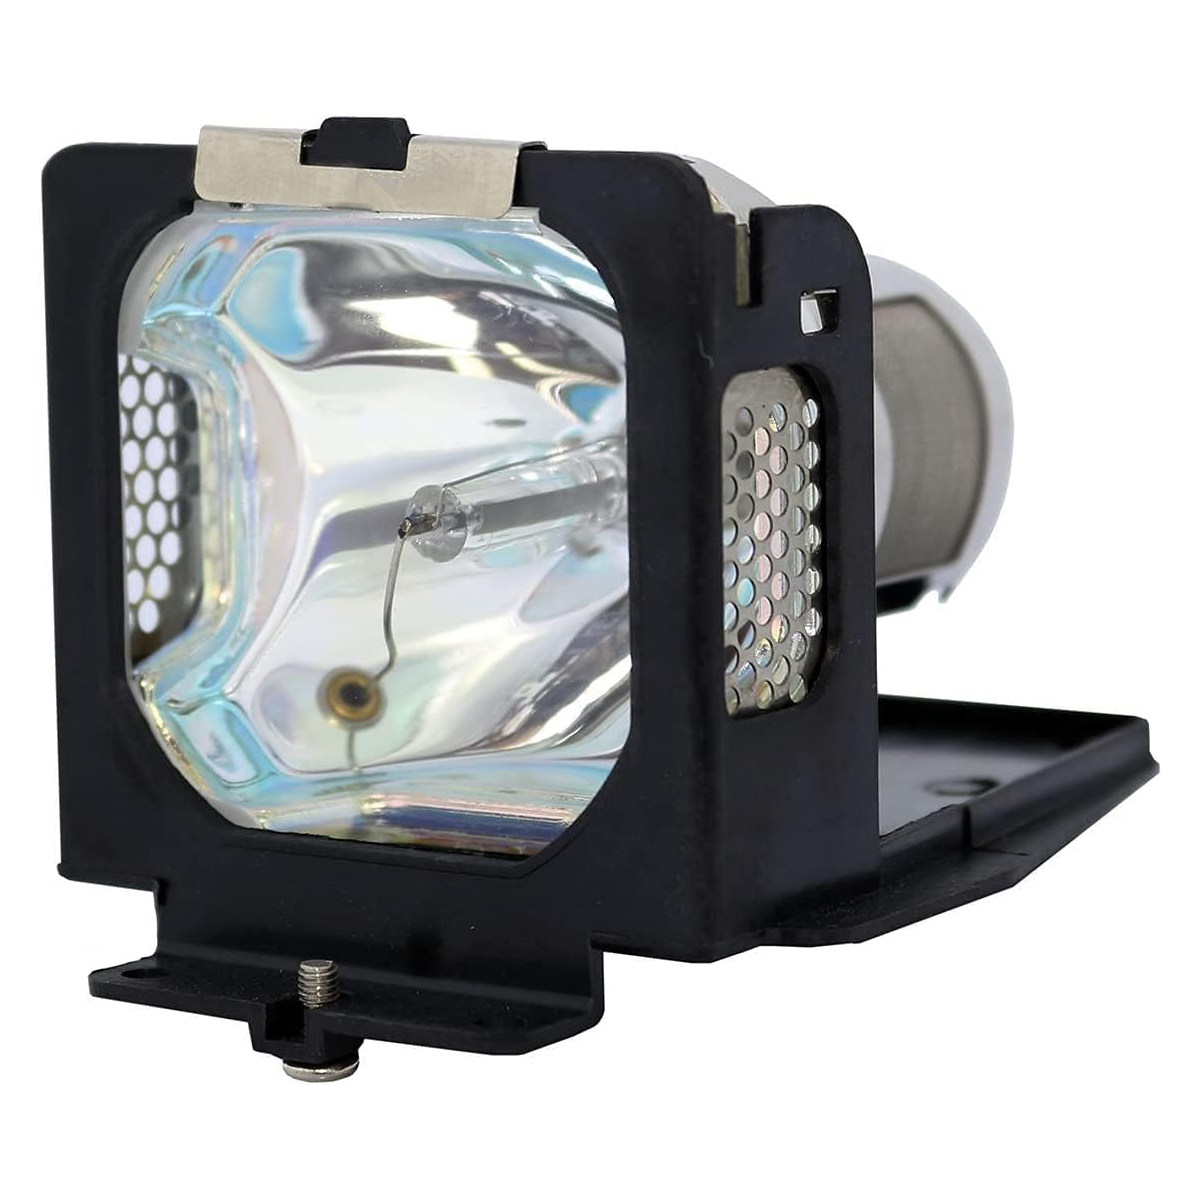 Replacement Projector lamp LV-LP21/9923A001AA For CANON LV-X4 I/LV-X4E